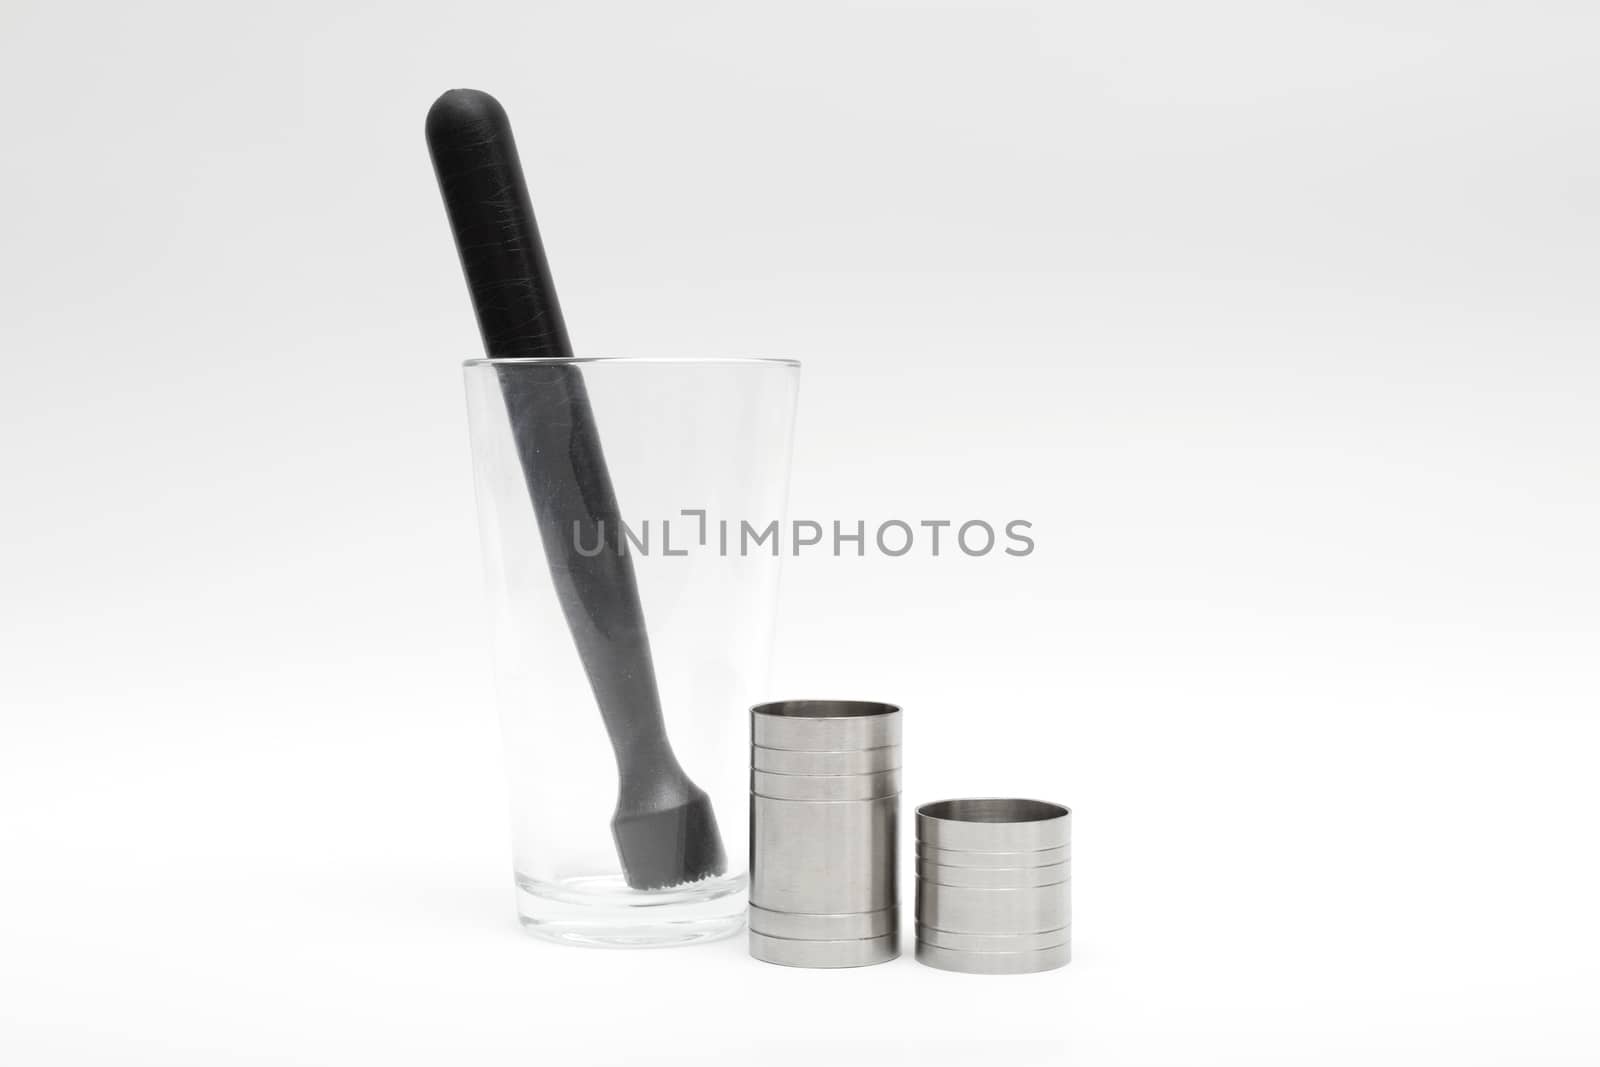 Various cocktail mixing utensils on a white background